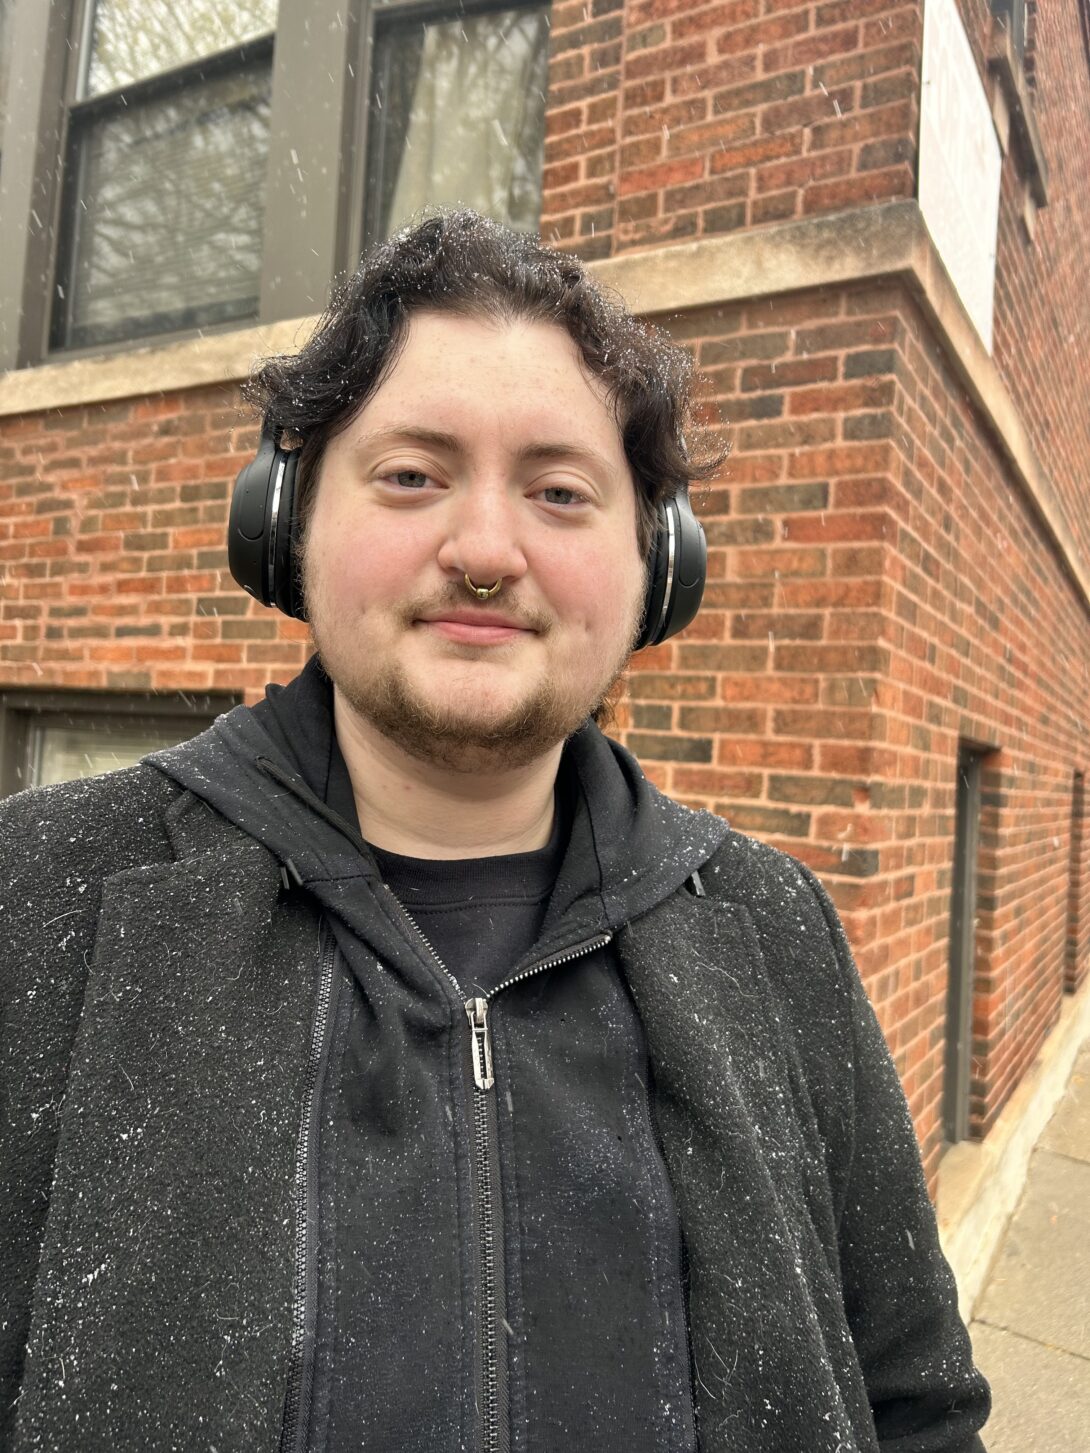 Theo is a white nonbinary person with a beard smiling for the camera. They are standing outside in front of a brick building while it is snowing. They are wearing a black jacket, over the ear headphones, and a large, silver septum ring.